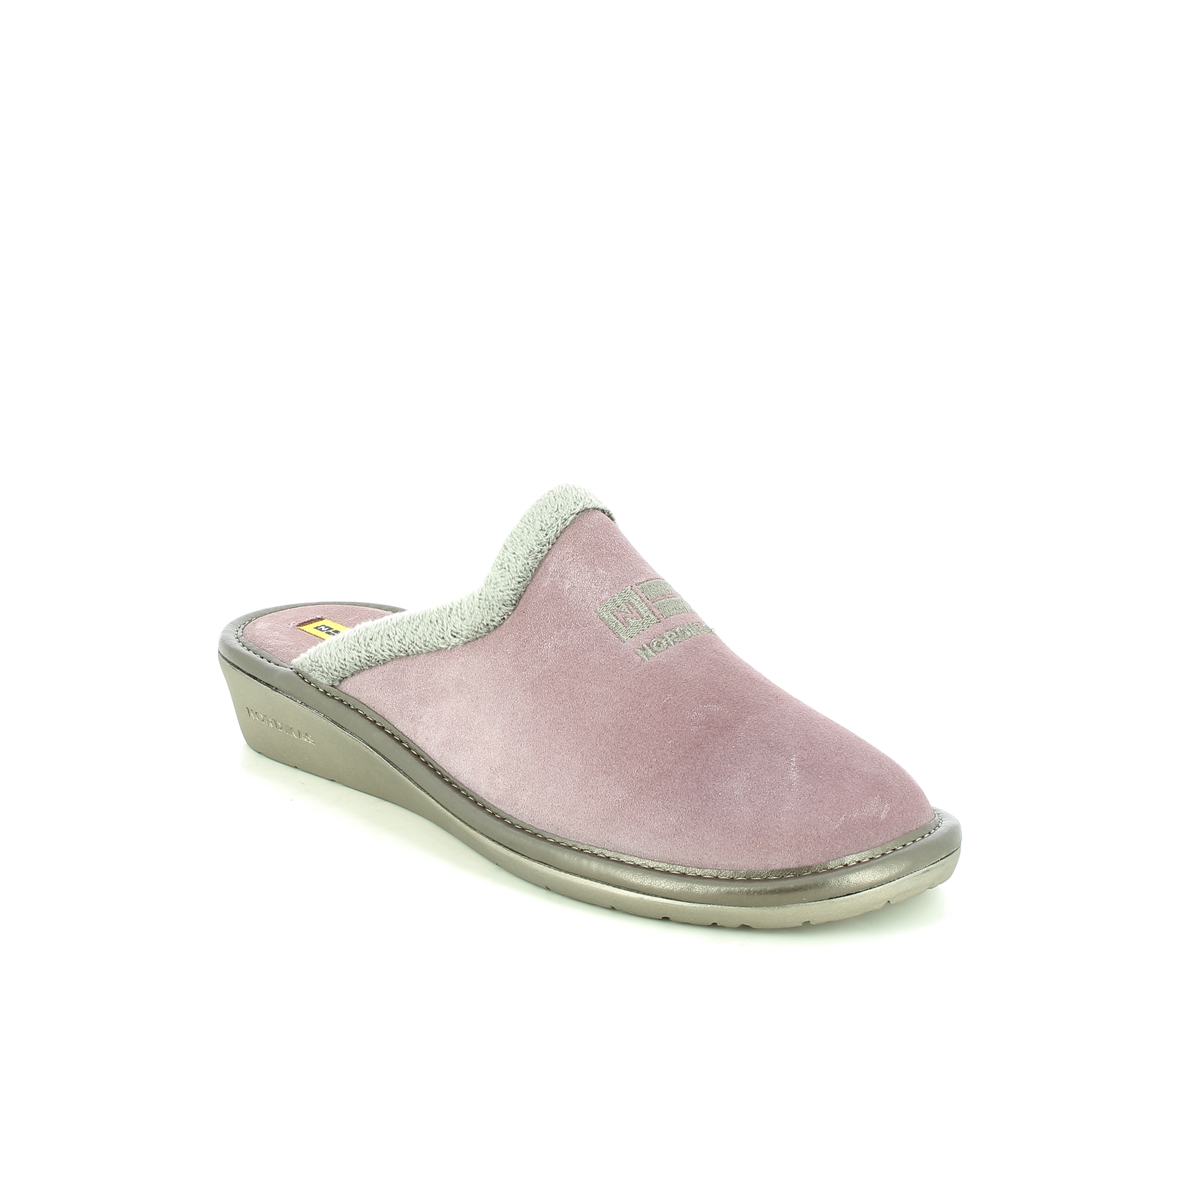 Nordikas Musue Pink Suede Womens Slipper Mules 238O-8   Natala 3 In Size 36 In Plain Pink Suede